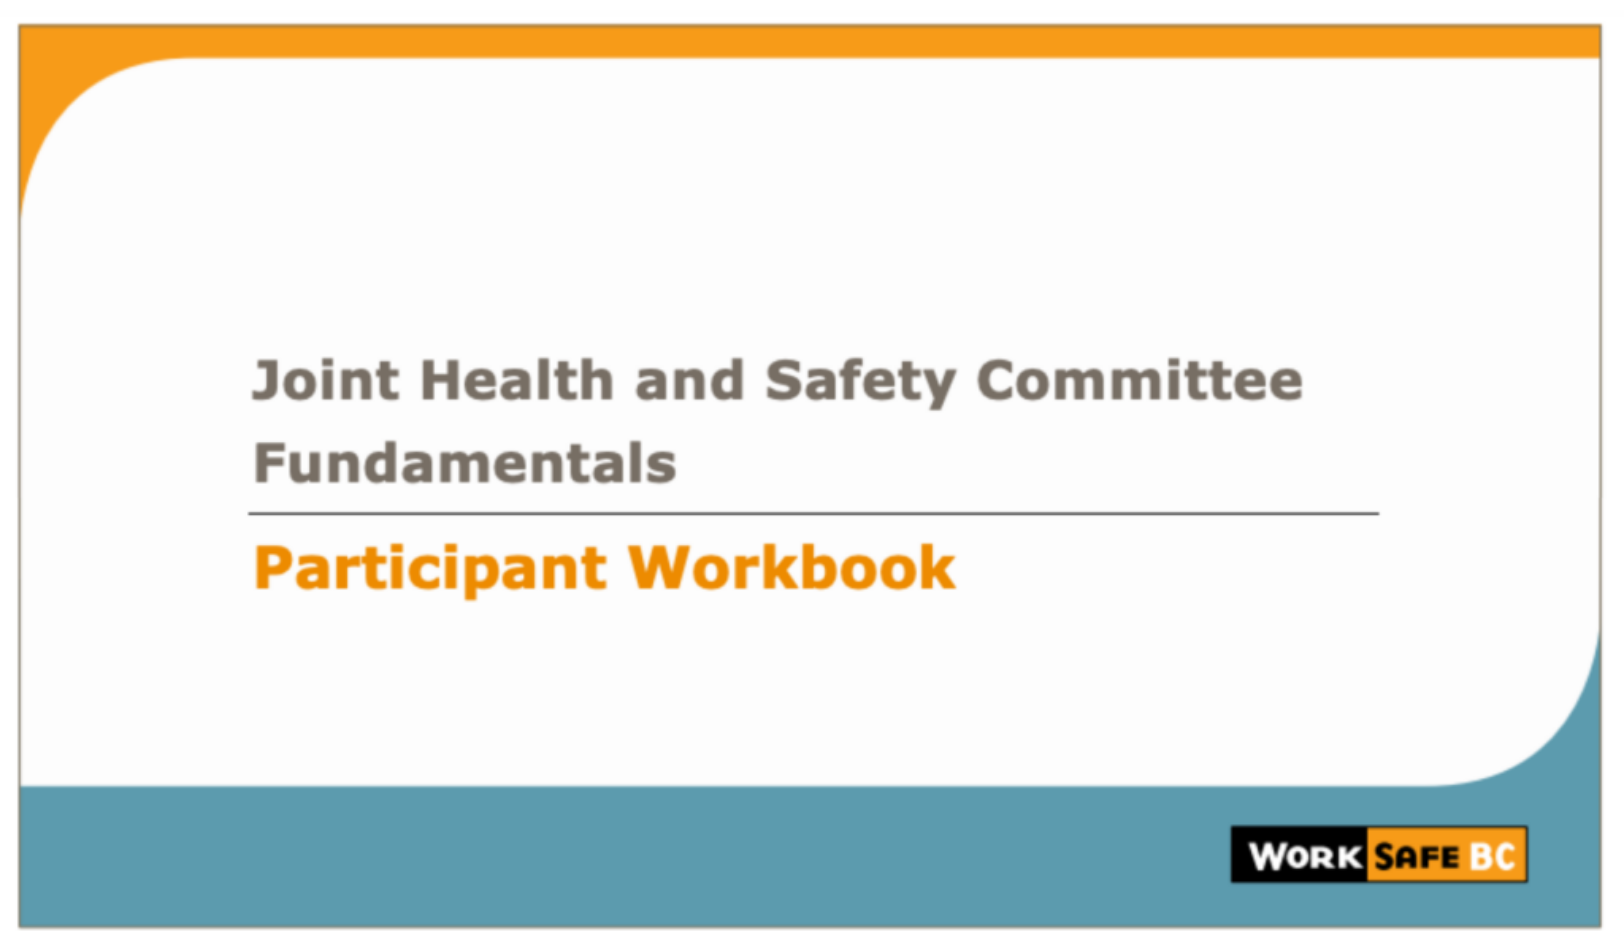 Joint Health and Safety Committee Fundamentals Participant Workbook